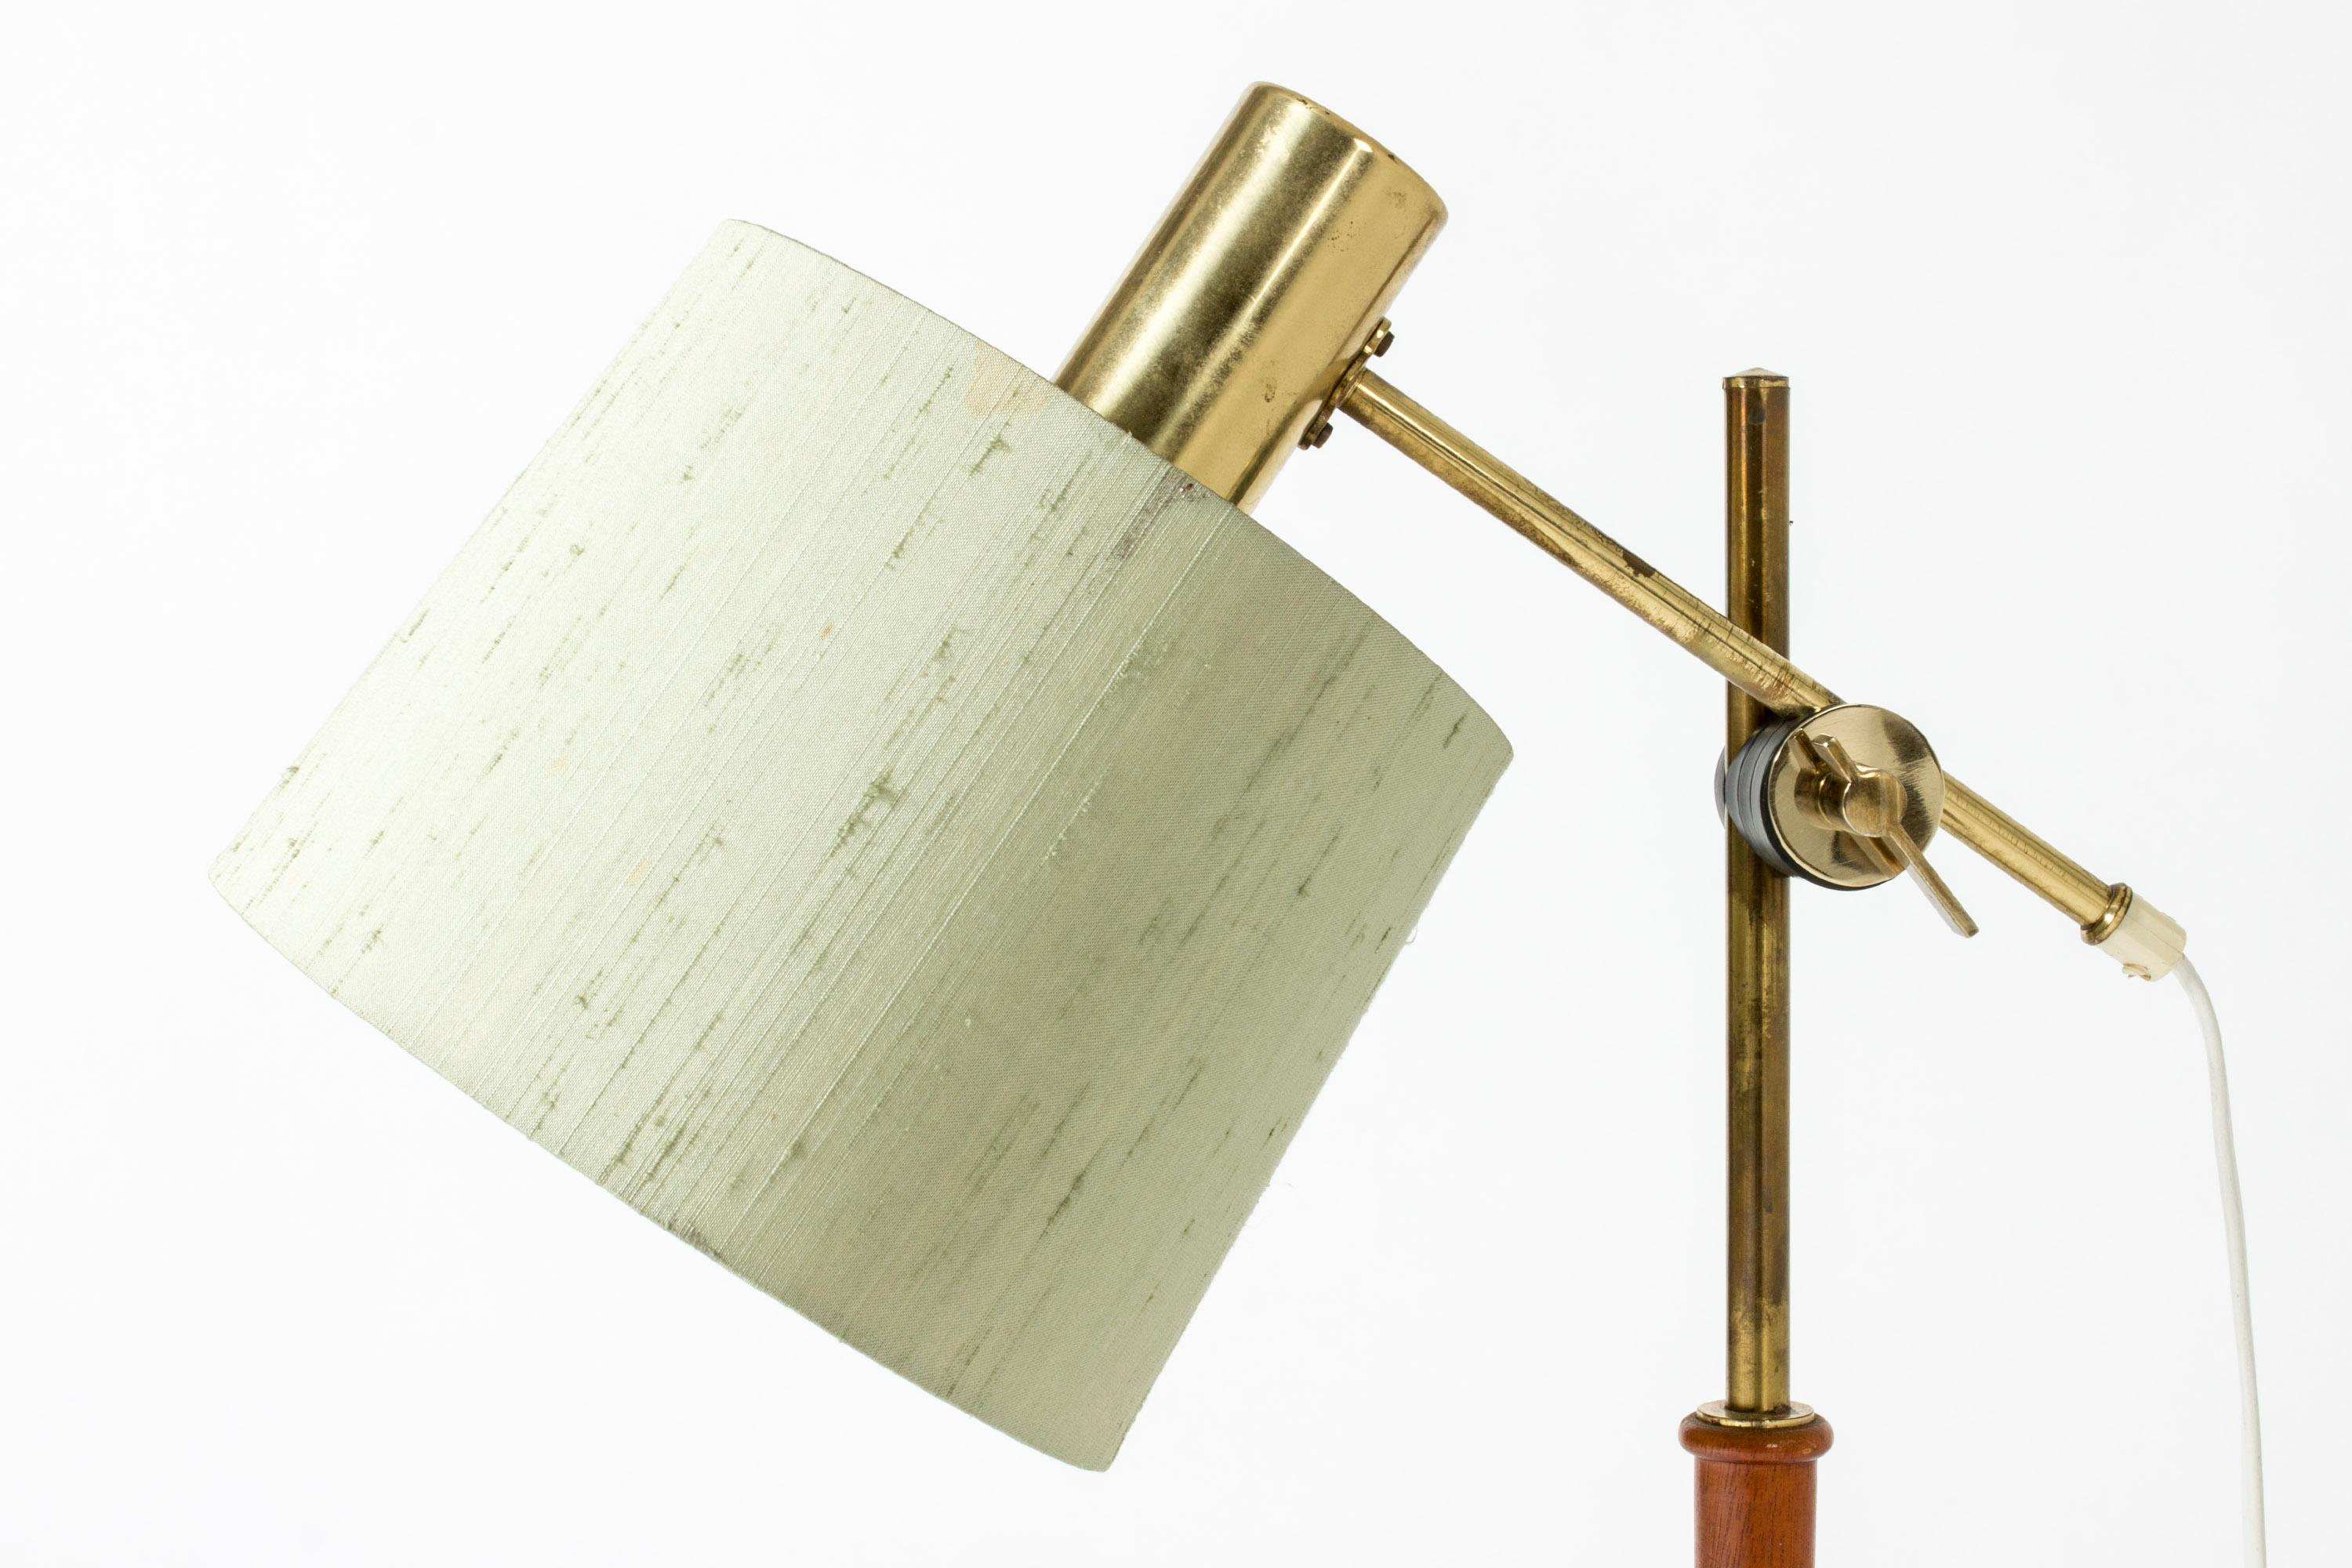 Cool table lamp from Falkenbergs Belysning, made from brass with a teak stem. Wood carved into a bamboo-stem form. Adjustable height and angle of the shade. Original silk shade.